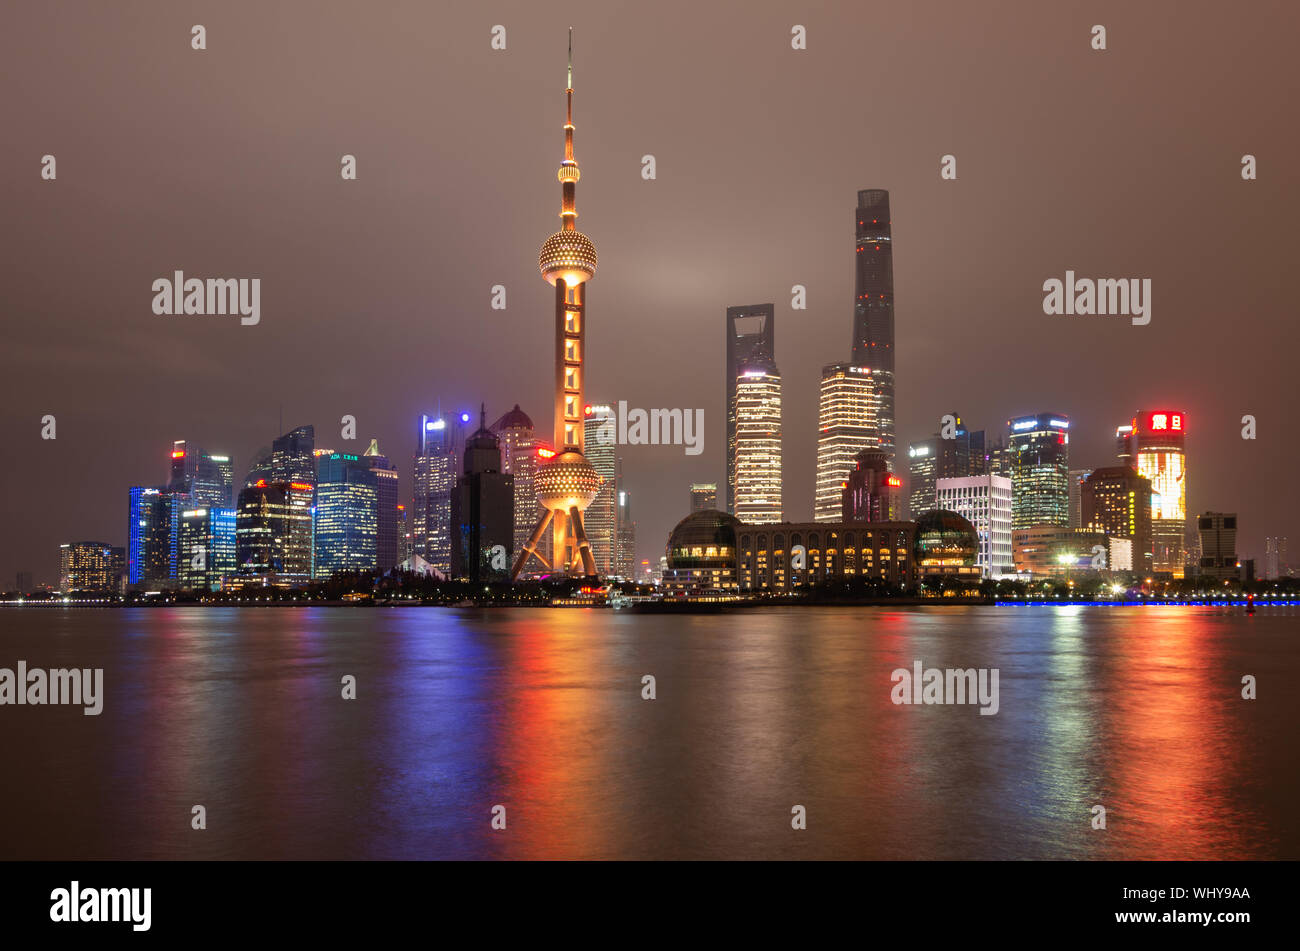 Shanghai Pudong city skyline at night with the Oriental Pearl TV Tower and Huangpu River light reflections, Shanghai, China Stock Photo